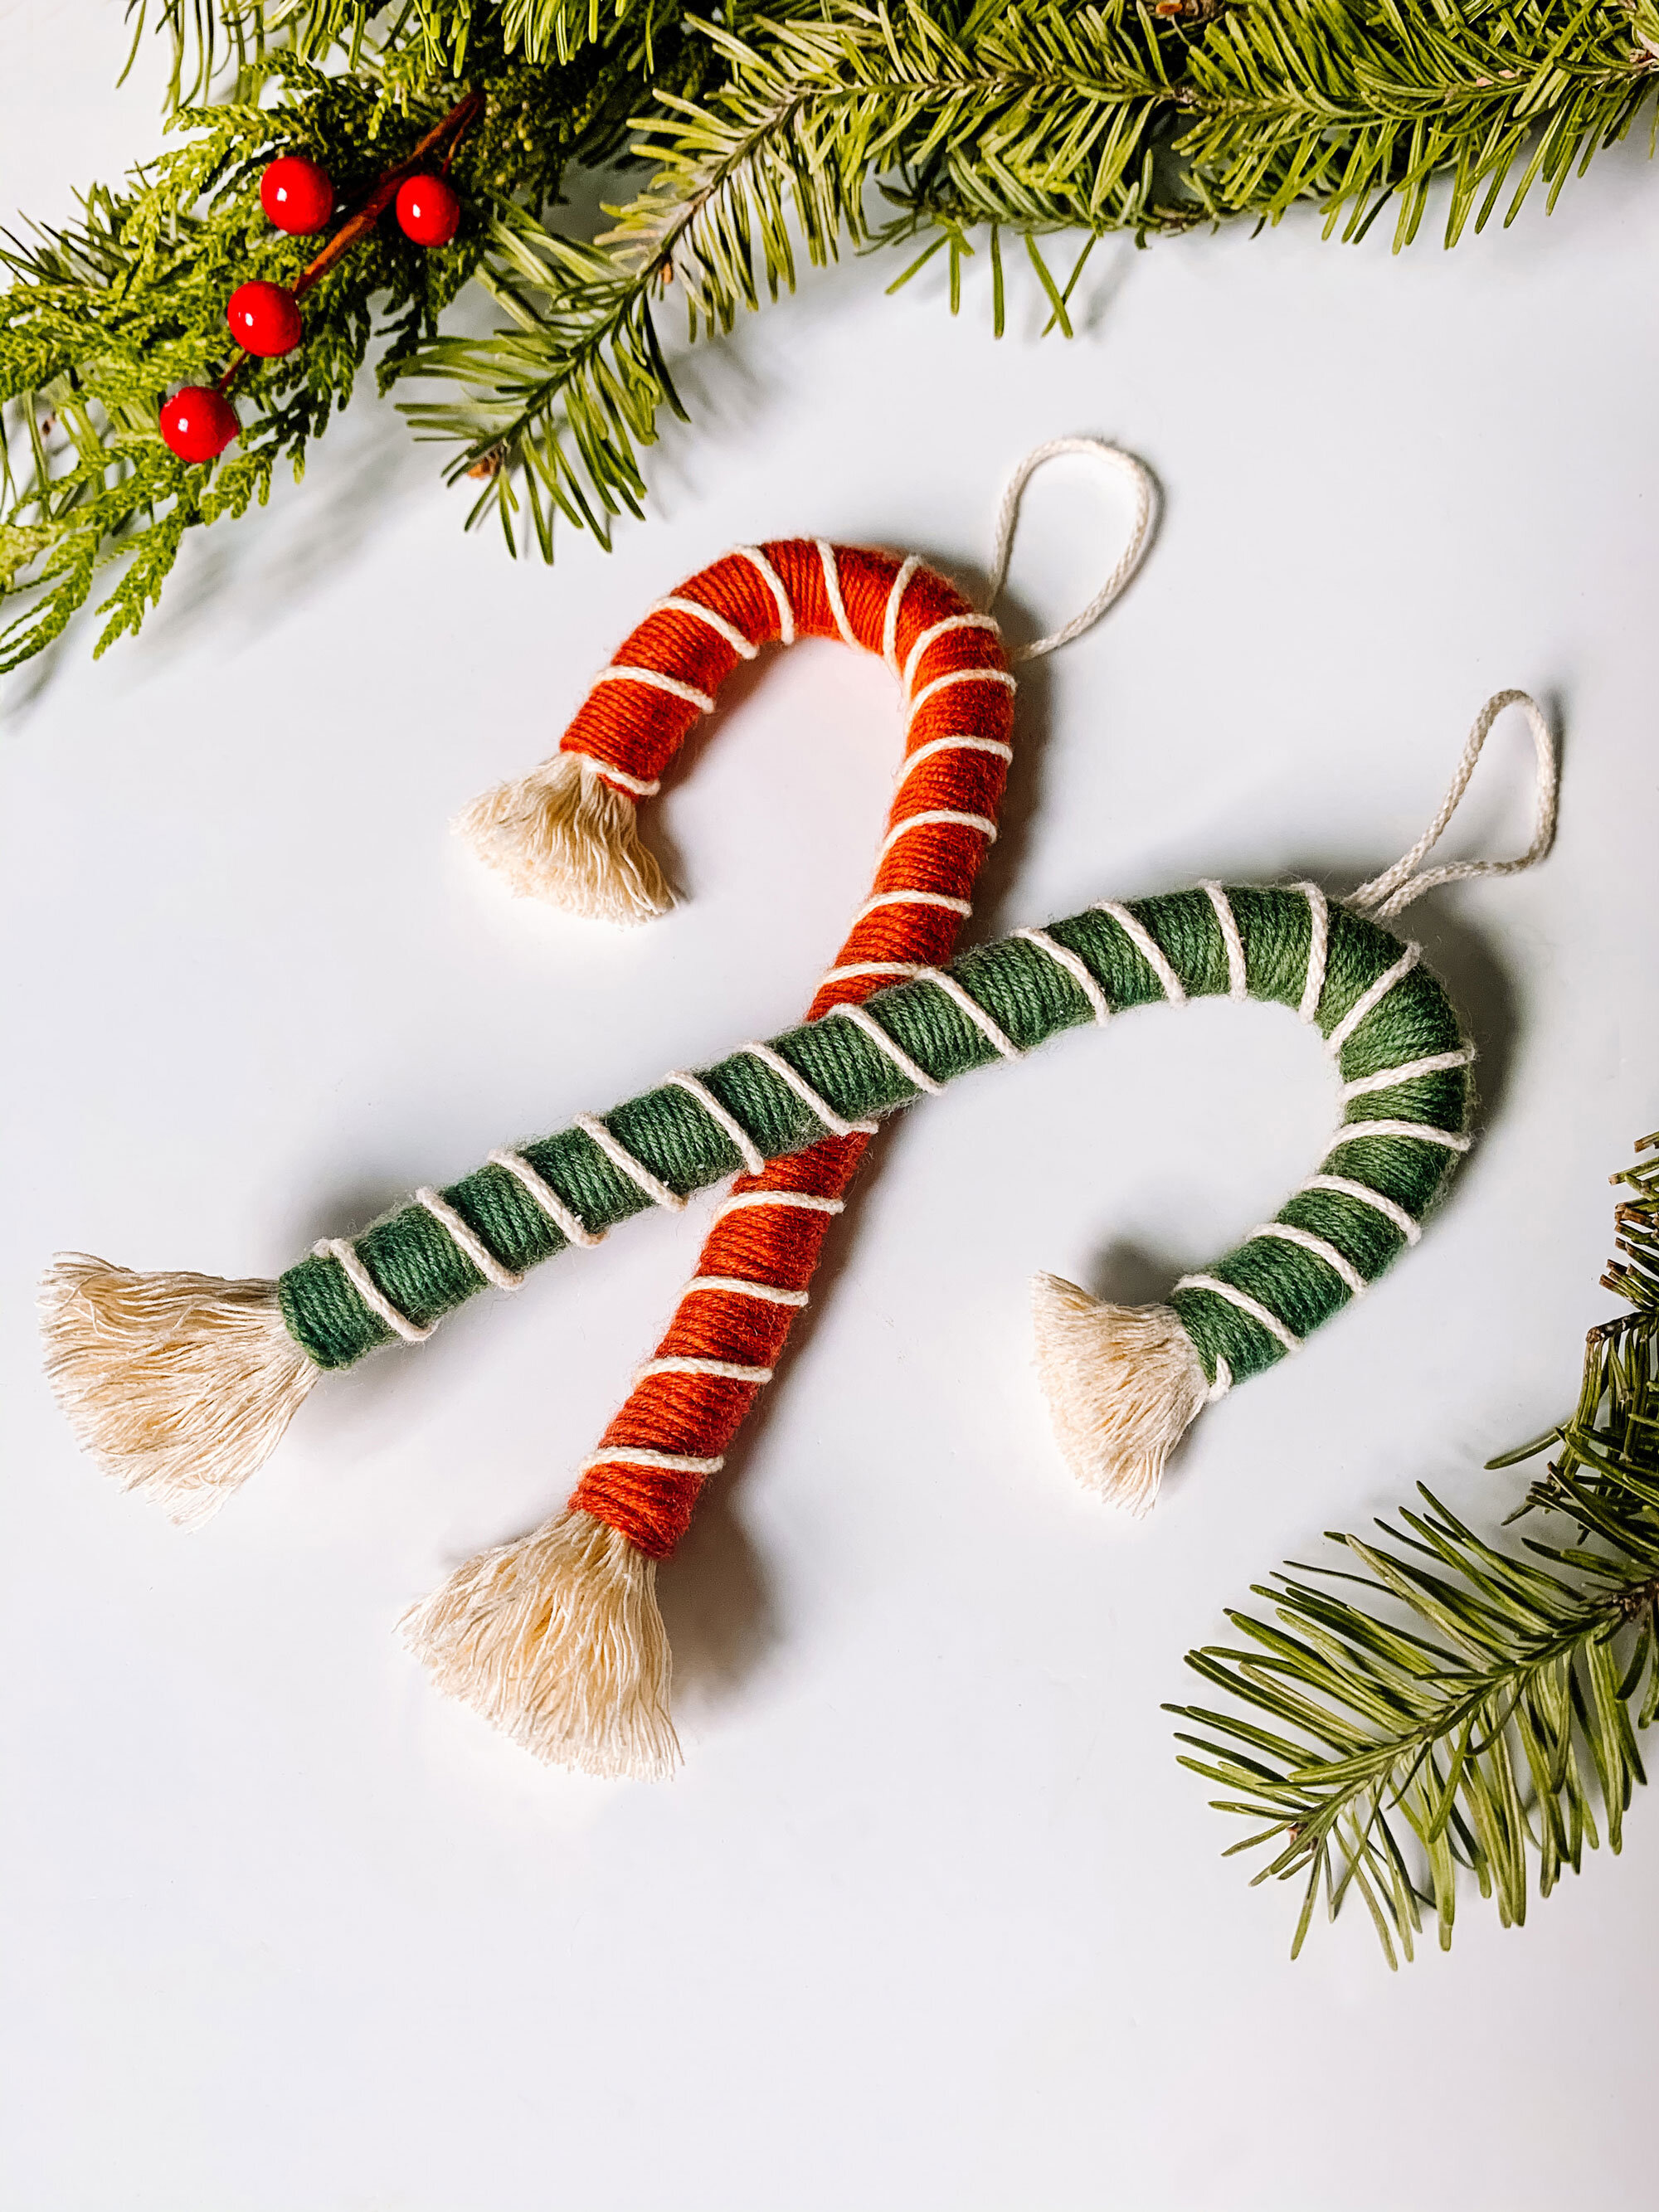 entrada Dialecto Orientar How to Make Macrame Candy Cane Ornaments — The Green Mad House